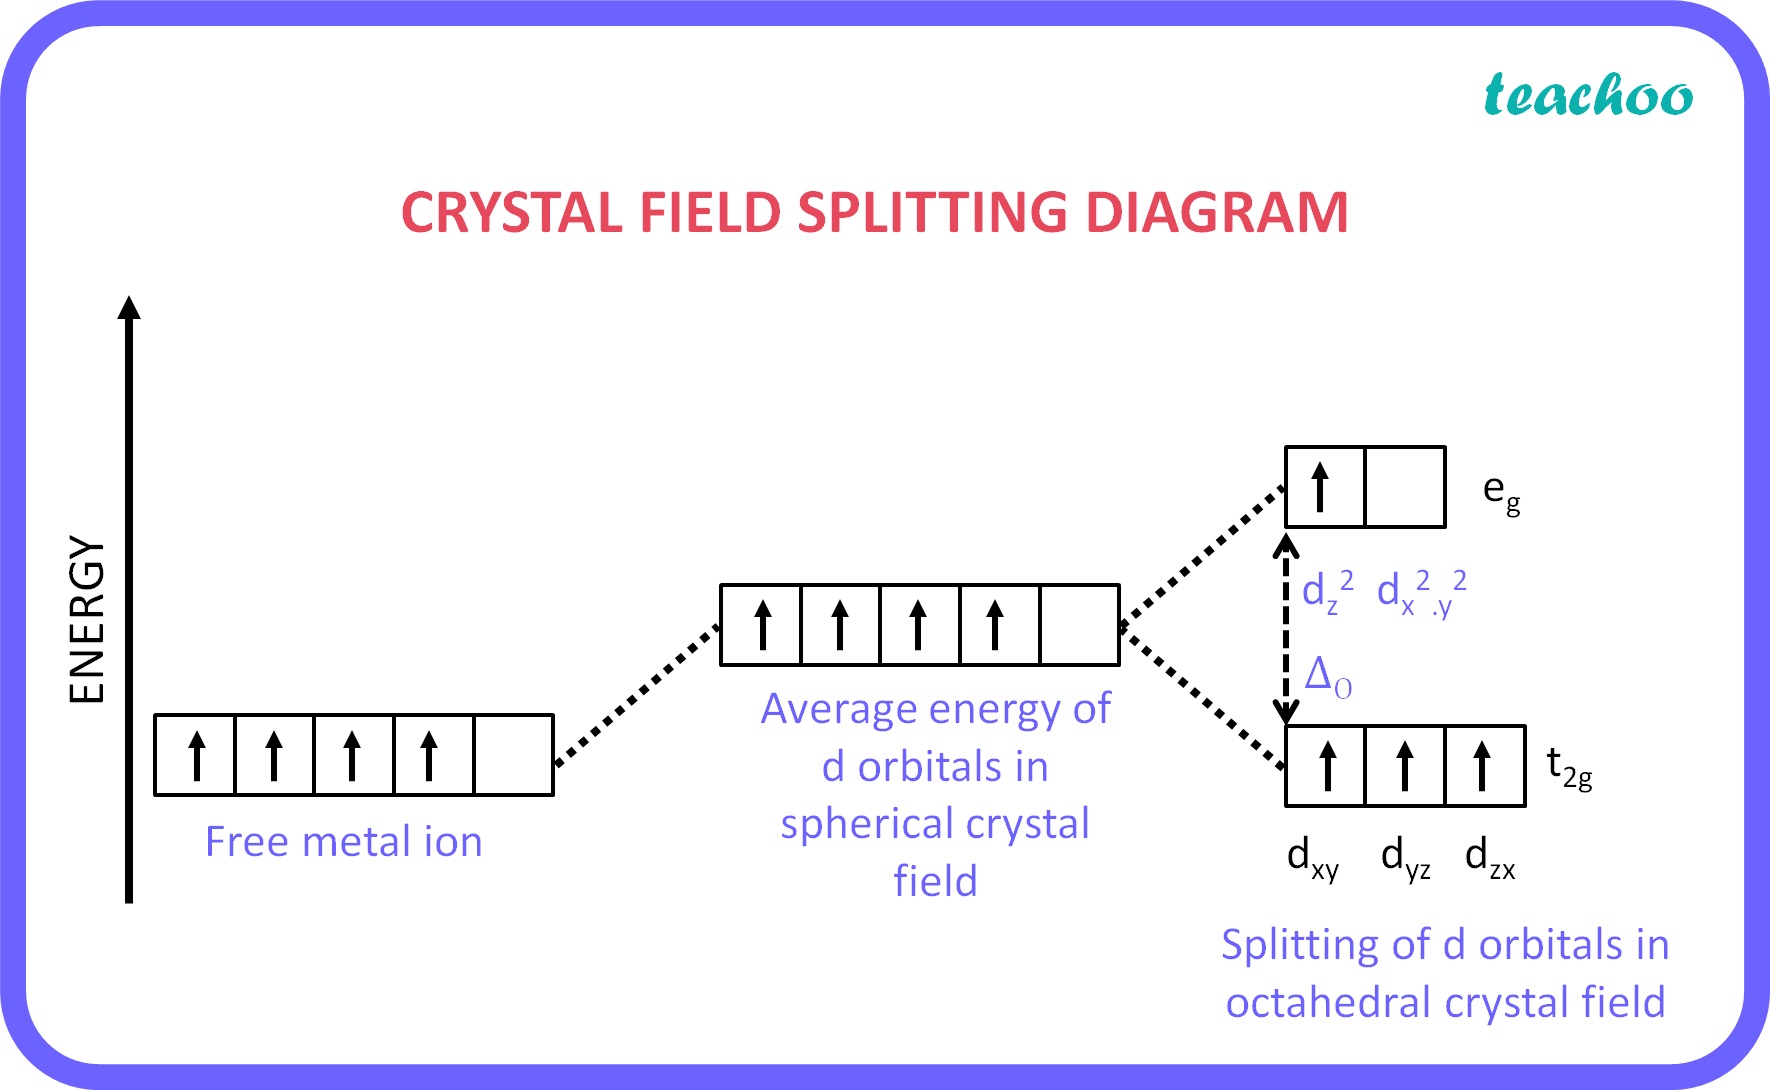 [Chemistry Class 12 SQP] Draw the crystal field splitting diagram for